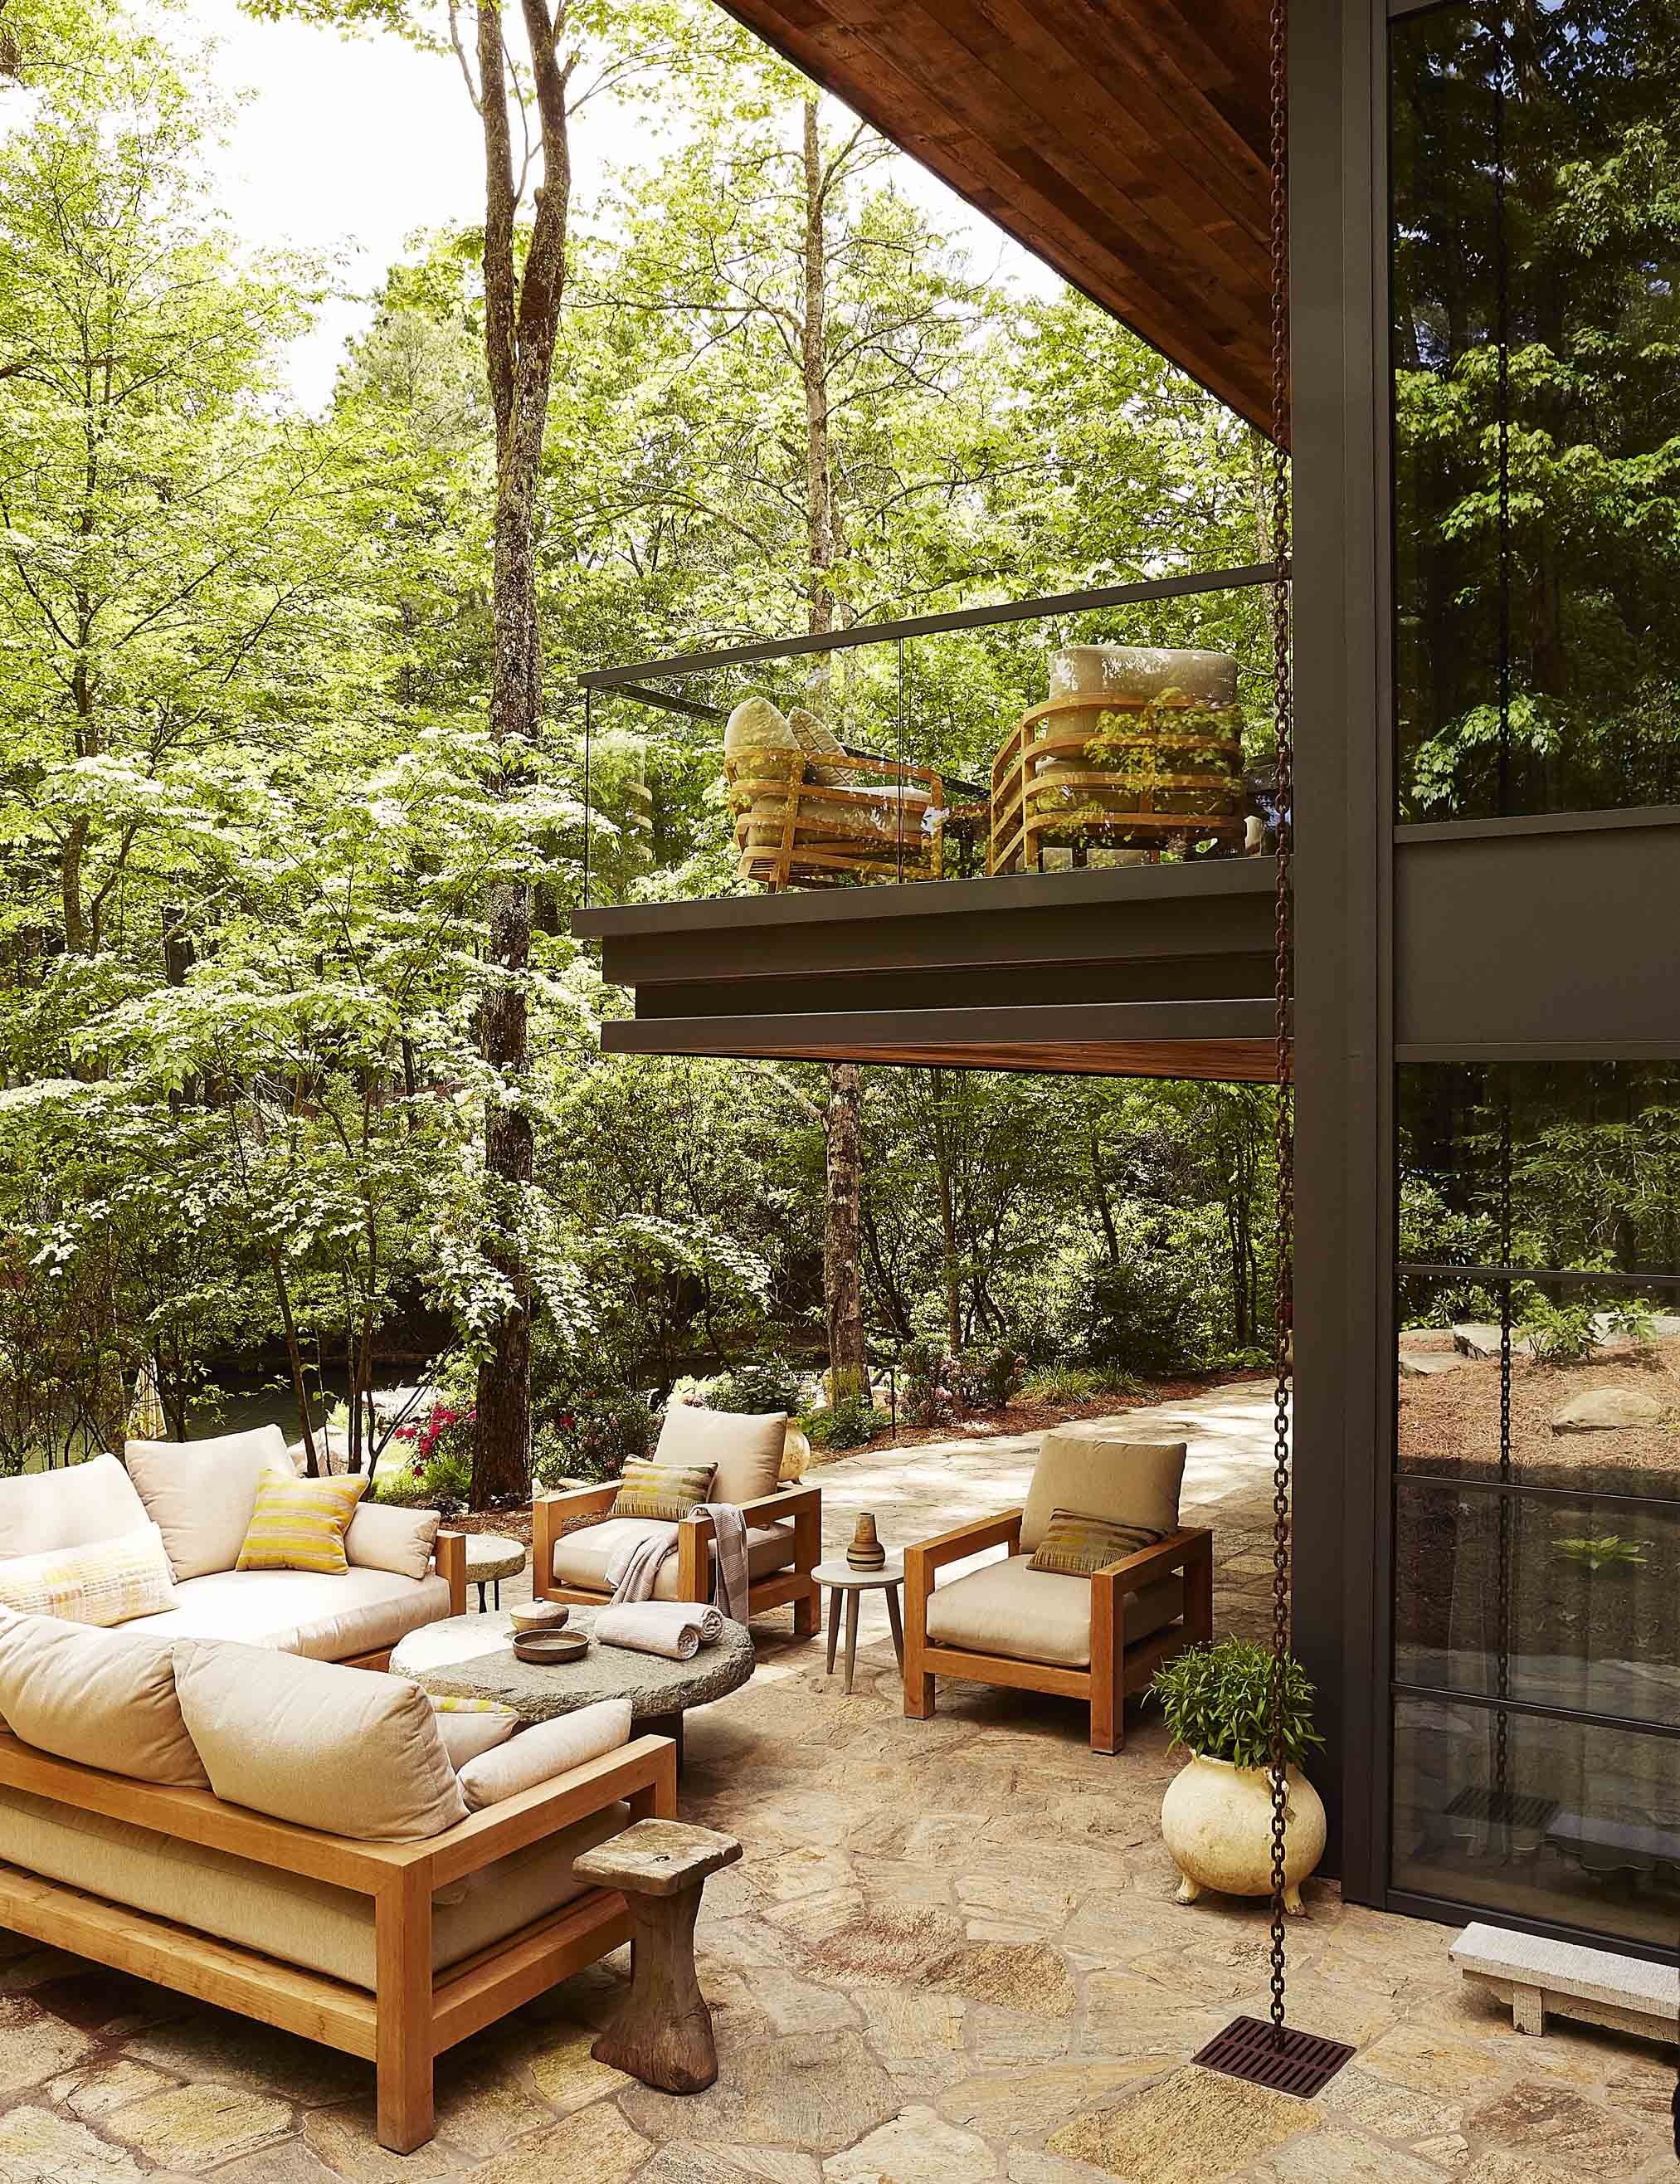 https://hips.hearstapps.com/hmg-prod/images/cliff-fong-lake-toxaway-terrace-1591835816.jpg